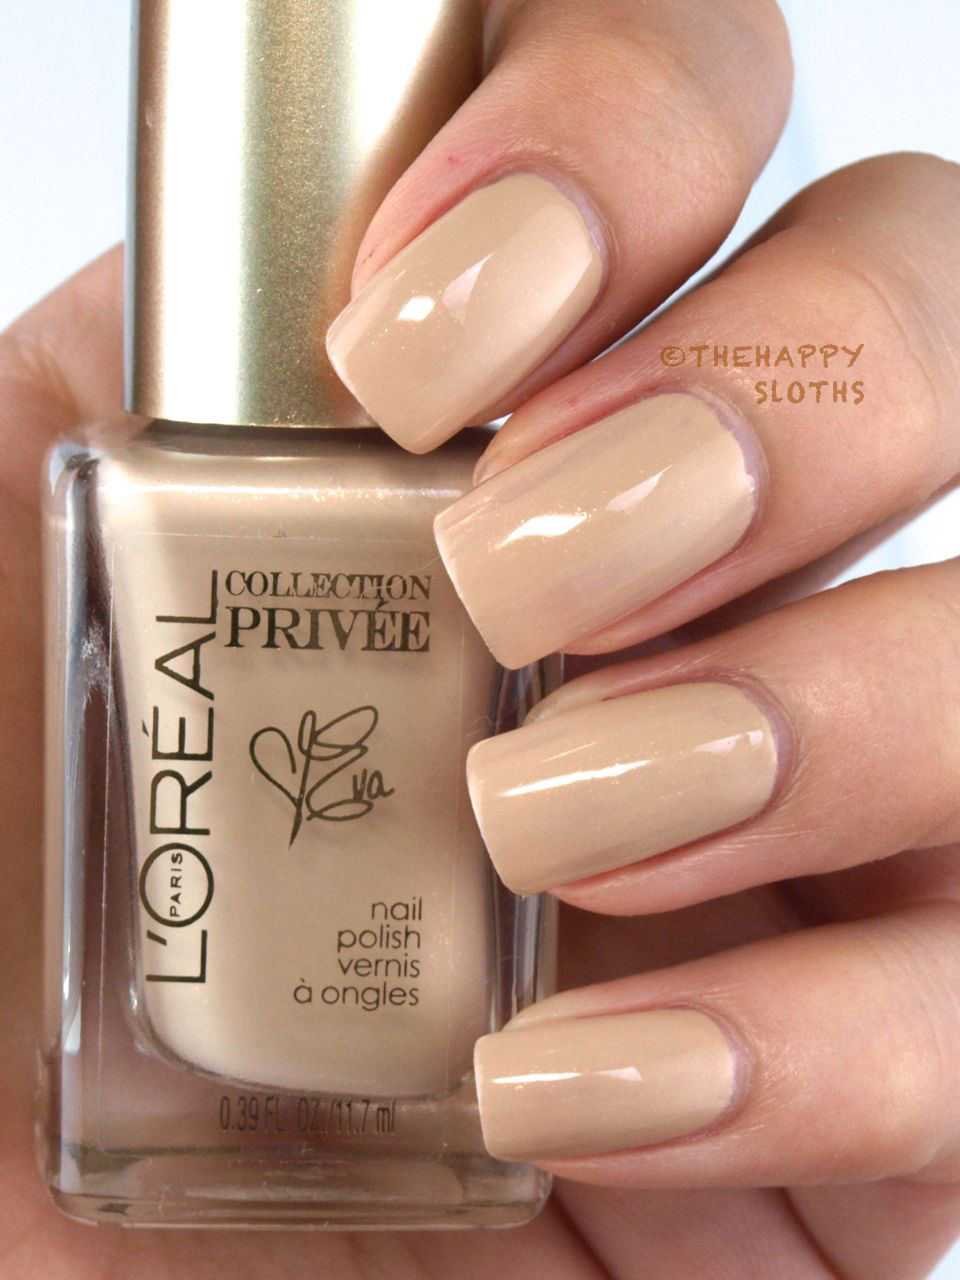 L'Oreal Collection Exclusive Nudes by Color Riche Nail Polish: Review and Swatches